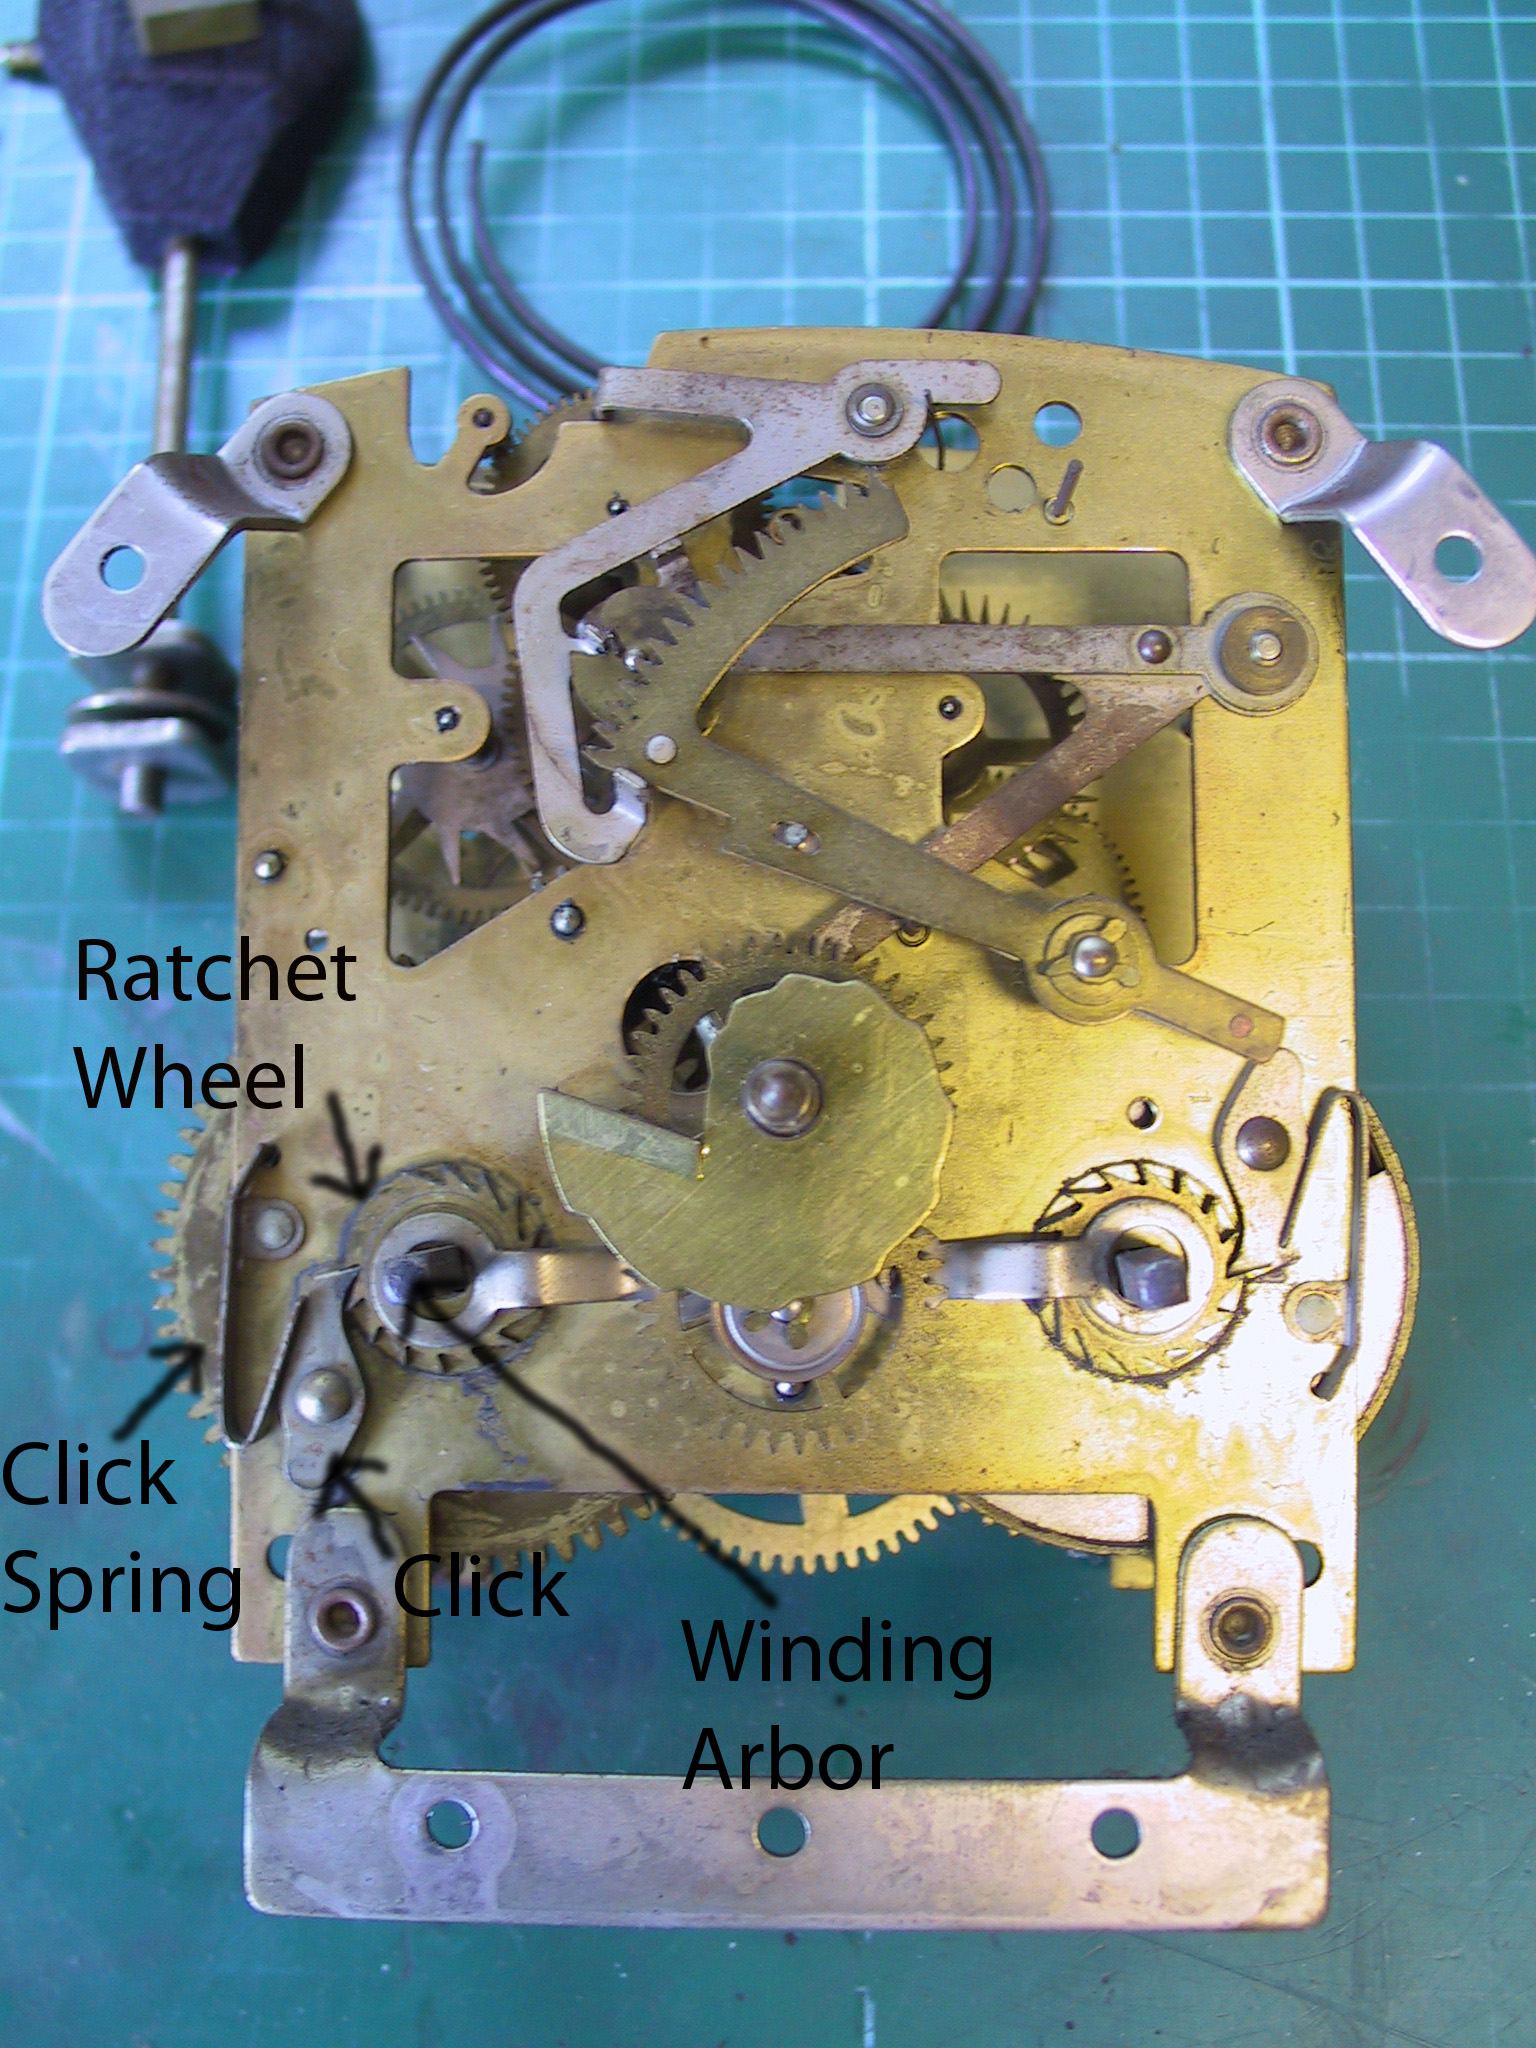 Clock mainspring release let down tool wall mantle clock repairs spring winding 